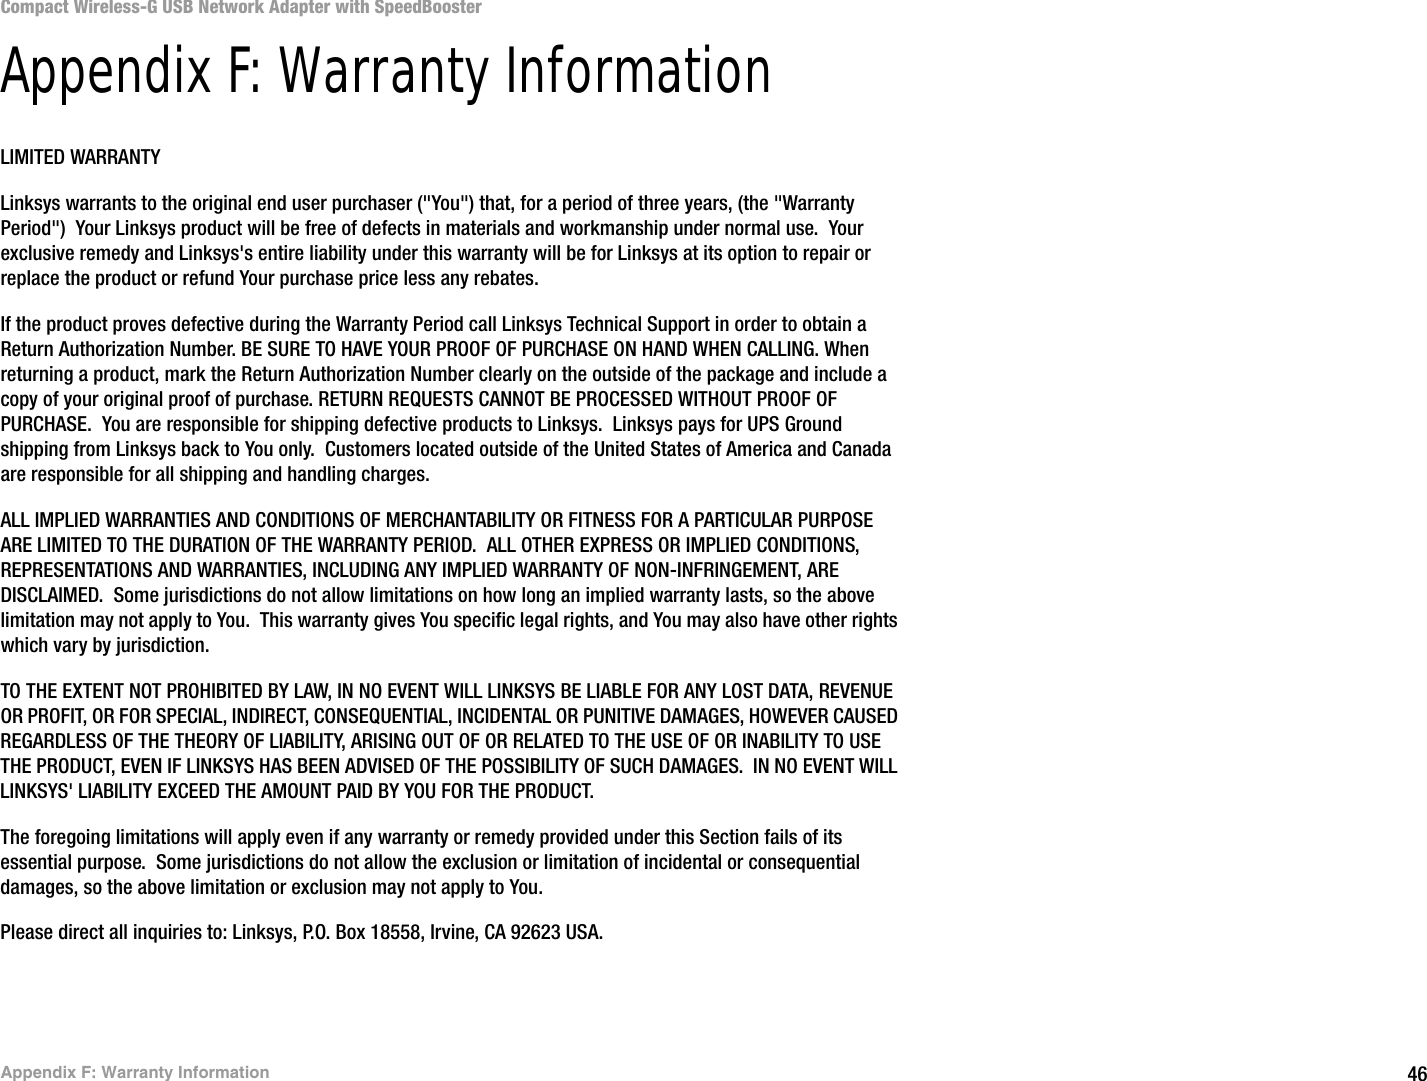 46Appendix F: Warranty InformationCompact Wireless-G USB Network Adapter with SpeedBoosterAppendix F: Warranty InformationLIMITED WARRANTYLinksys warrants to the original end user purchaser (&quot;You&quot;) that, for a period of three years, (the &quot;Warranty Period&quot;)  Your Linksys product will be free of defects in materials and workmanship under normal use.  Your exclusive remedy and Linksys&apos;s entire liability under this warranty will be for Linksys at its option to repair or replace the product or refund Your purchase price less any rebates.If the product proves defective during the Warranty Period call Linksys Technical Support in order to obtain a Return Authorization Number. BE SURE TO HAVE YOUR PROOF OF PURCHASE ON HAND WHEN CALLING. When returning a product, mark the Return Authorization Number clearly on the outside of the package and include a copy of your original proof of purchase. RETURN REQUESTS CANNOT BE PROCESSED WITHOUT PROOF OF PURCHASE.  You are responsible for shipping defective products to Linksys.  Linksys pays for UPS Ground shipping from Linksys back to You only.  Customers located outside of the United States of America and Canada are responsible for all shipping and handling charges. ALL IMPLIED WARRANTIES AND CONDITIONS OF MERCHANTABILITY OR FITNESS FOR A PARTICULAR PURPOSE ARE LIMITED TO THE DURATION OF THE WARRANTY PERIOD.  ALL OTHER EXPRESS OR IMPLIED CONDITIONS, REPRESENTATIONS AND WARRANTIES, INCLUDING ANY IMPLIED WARRANTY OF NON-INFRINGEMENT, ARE DISCLAIMED.  Some jurisdictions do not allow limitations on how long an implied warranty lasts, so the above limitation may not apply to You.  This warranty gives You specific legal rights, and You may also have other rights which vary by jurisdiction.TO THE EXTENT NOT PROHIBITED BY LAW, IN NO EVENT WILL LINKSYS BE LIABLE FOR ANY LOST DATA, REVENUE OR PROFIT, OR FOR SPECIAL, INDIRECT, CONSEQUENTIAL, INCIDENTAL OR PUNITIVE DAMAGES, HOWEVER CAUSED REGARDLESS OF THE THEORY OF LIABILITY, ARISING OUT OF OR RELATED TO THE USE OF OR INABILITY TO USE THE PRODUCT, EVEN IF LINKSYS HAS BEEN ADVISED OF THE POSSIBILITY OF SUCH DAMAGES.  IN NO EVENT WILL LINKSYS&apos; LIABILITY EXCEED THE AMOUNT PAID BY YOU FOR THE PRODUCT.  The foregoing limitations will apply even if any warranty or remedy provided under this Section fails of its essential purpose.  Some jurisdictions do not allow the exclusion or limitation of incidental or consequential damages, so the above limitation or exclusion may not apply to You.Please direct all inquiries to: Linksys, P.O. Box 18558, Irvine, CA 92623 USA.